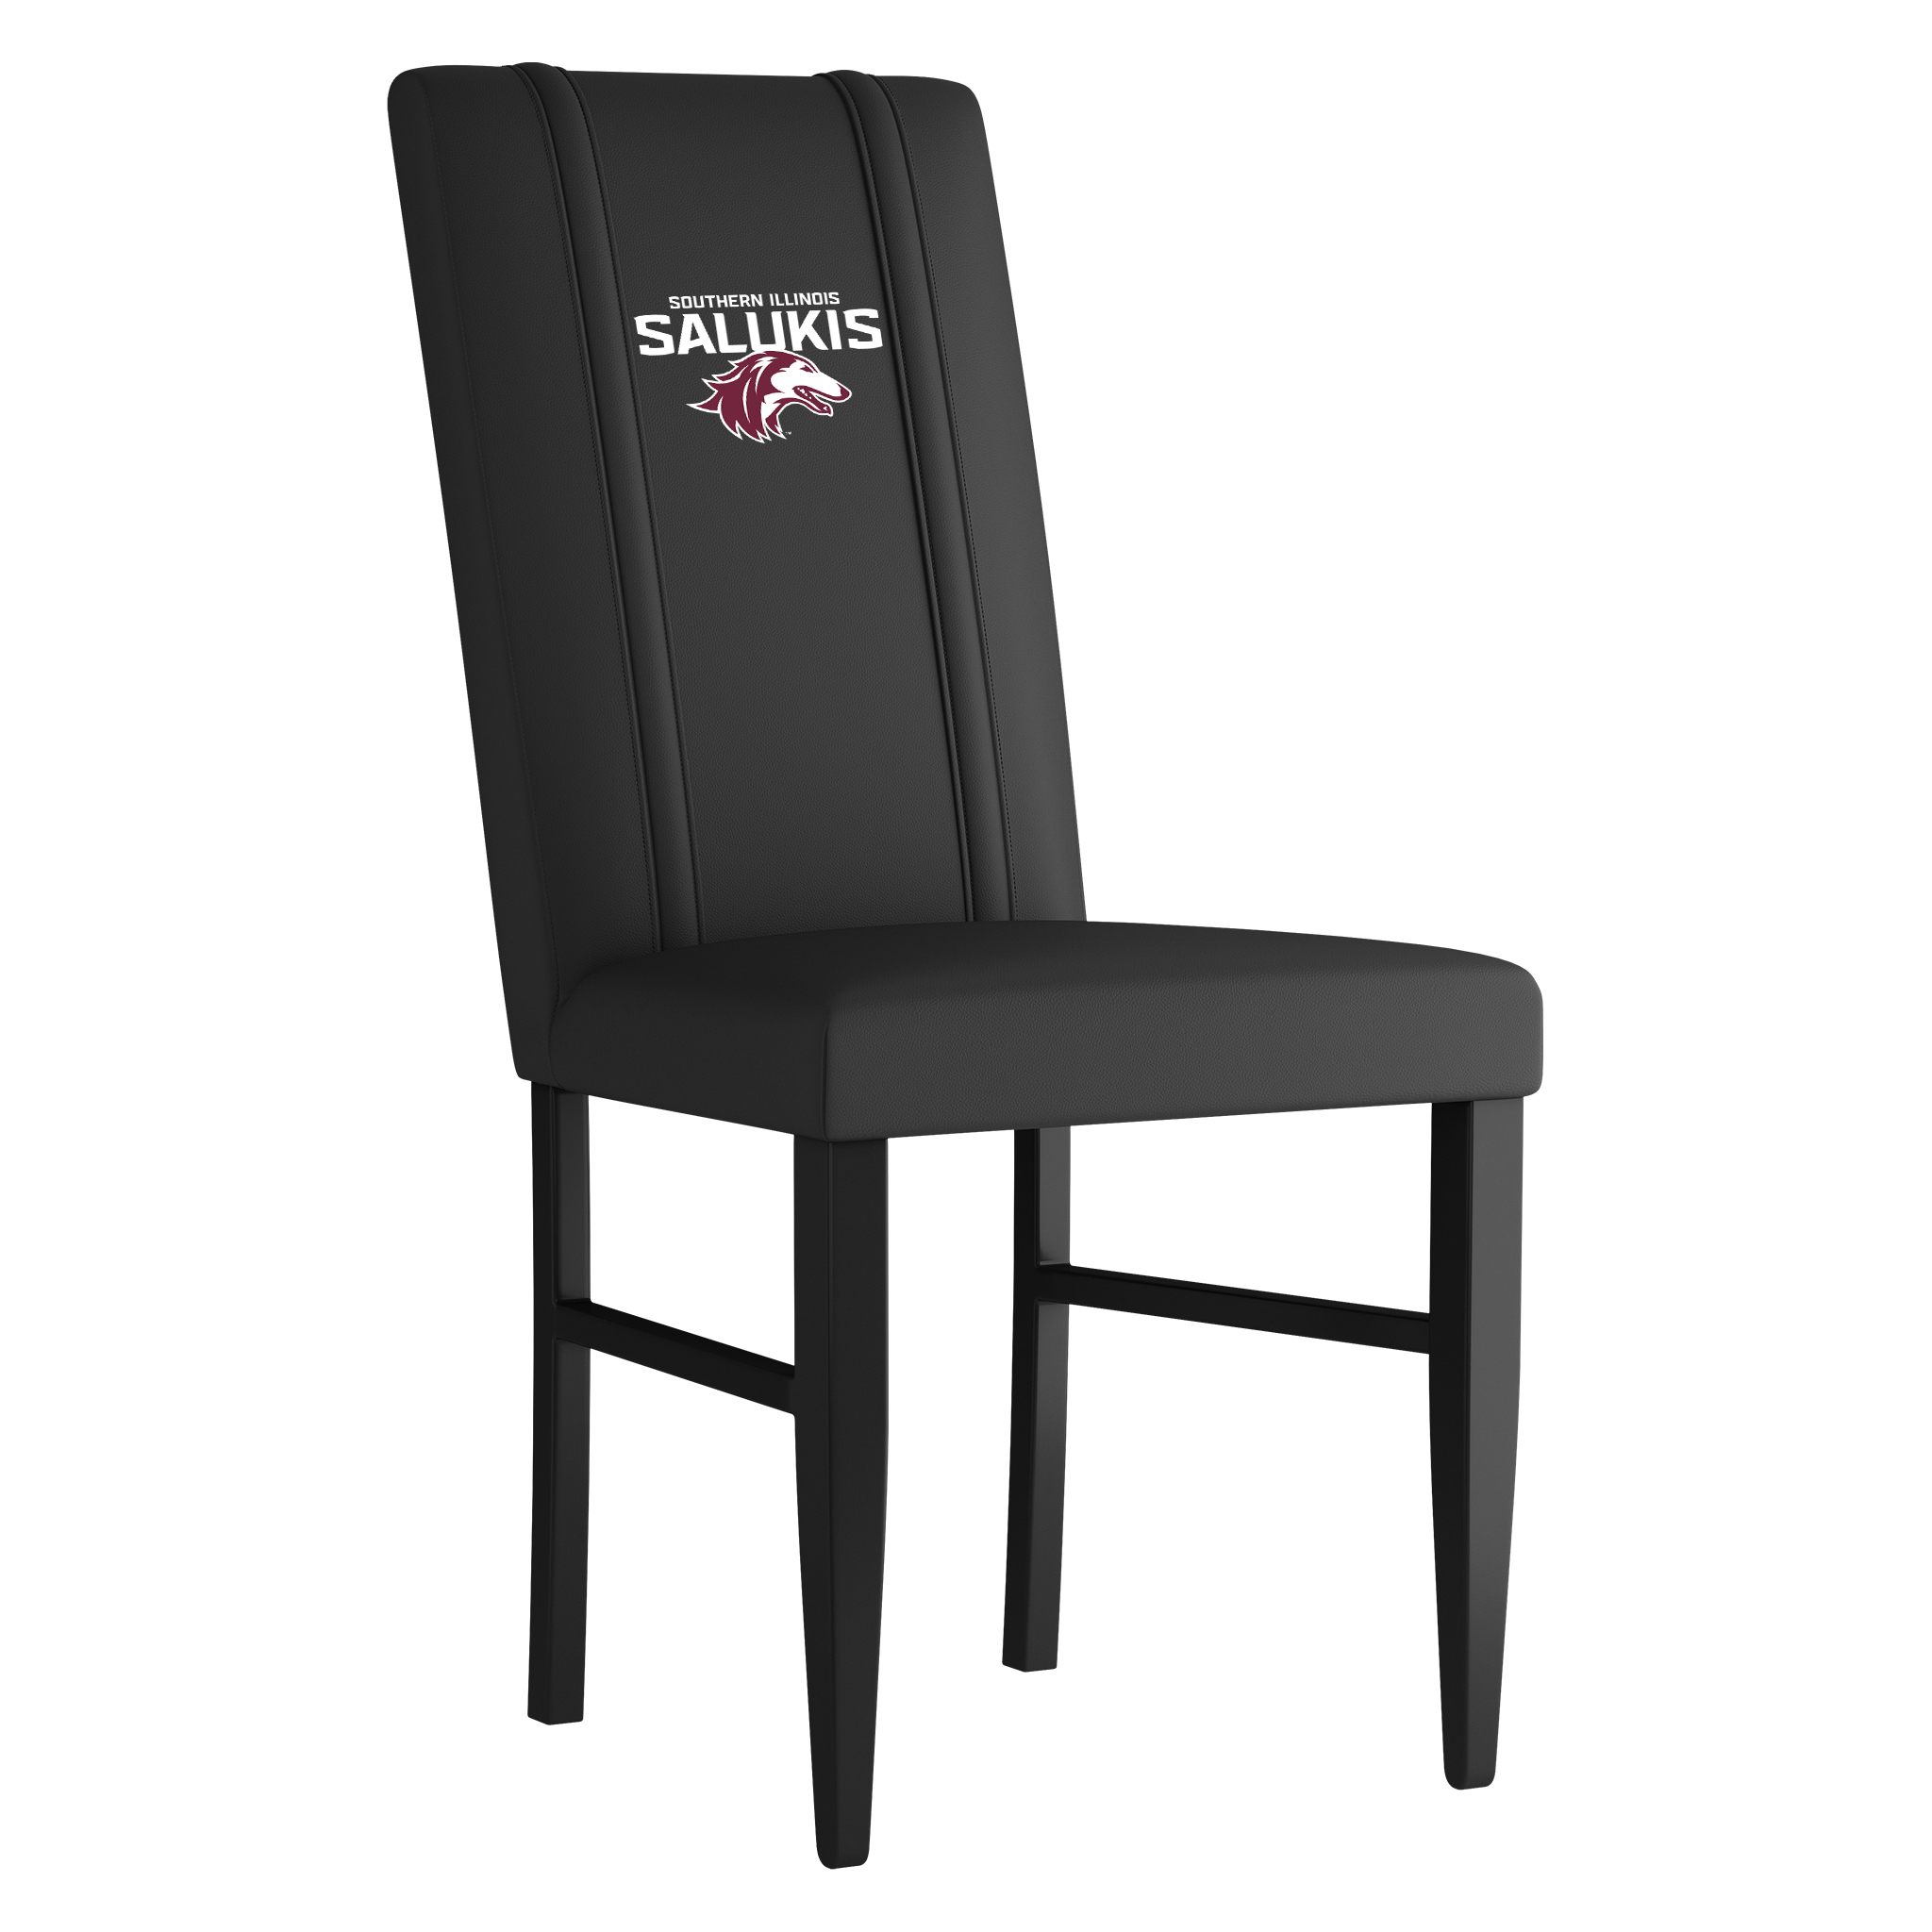 Southern Illinois Salukis Side Chair 2000 With Southern Illinois Salukis Logo